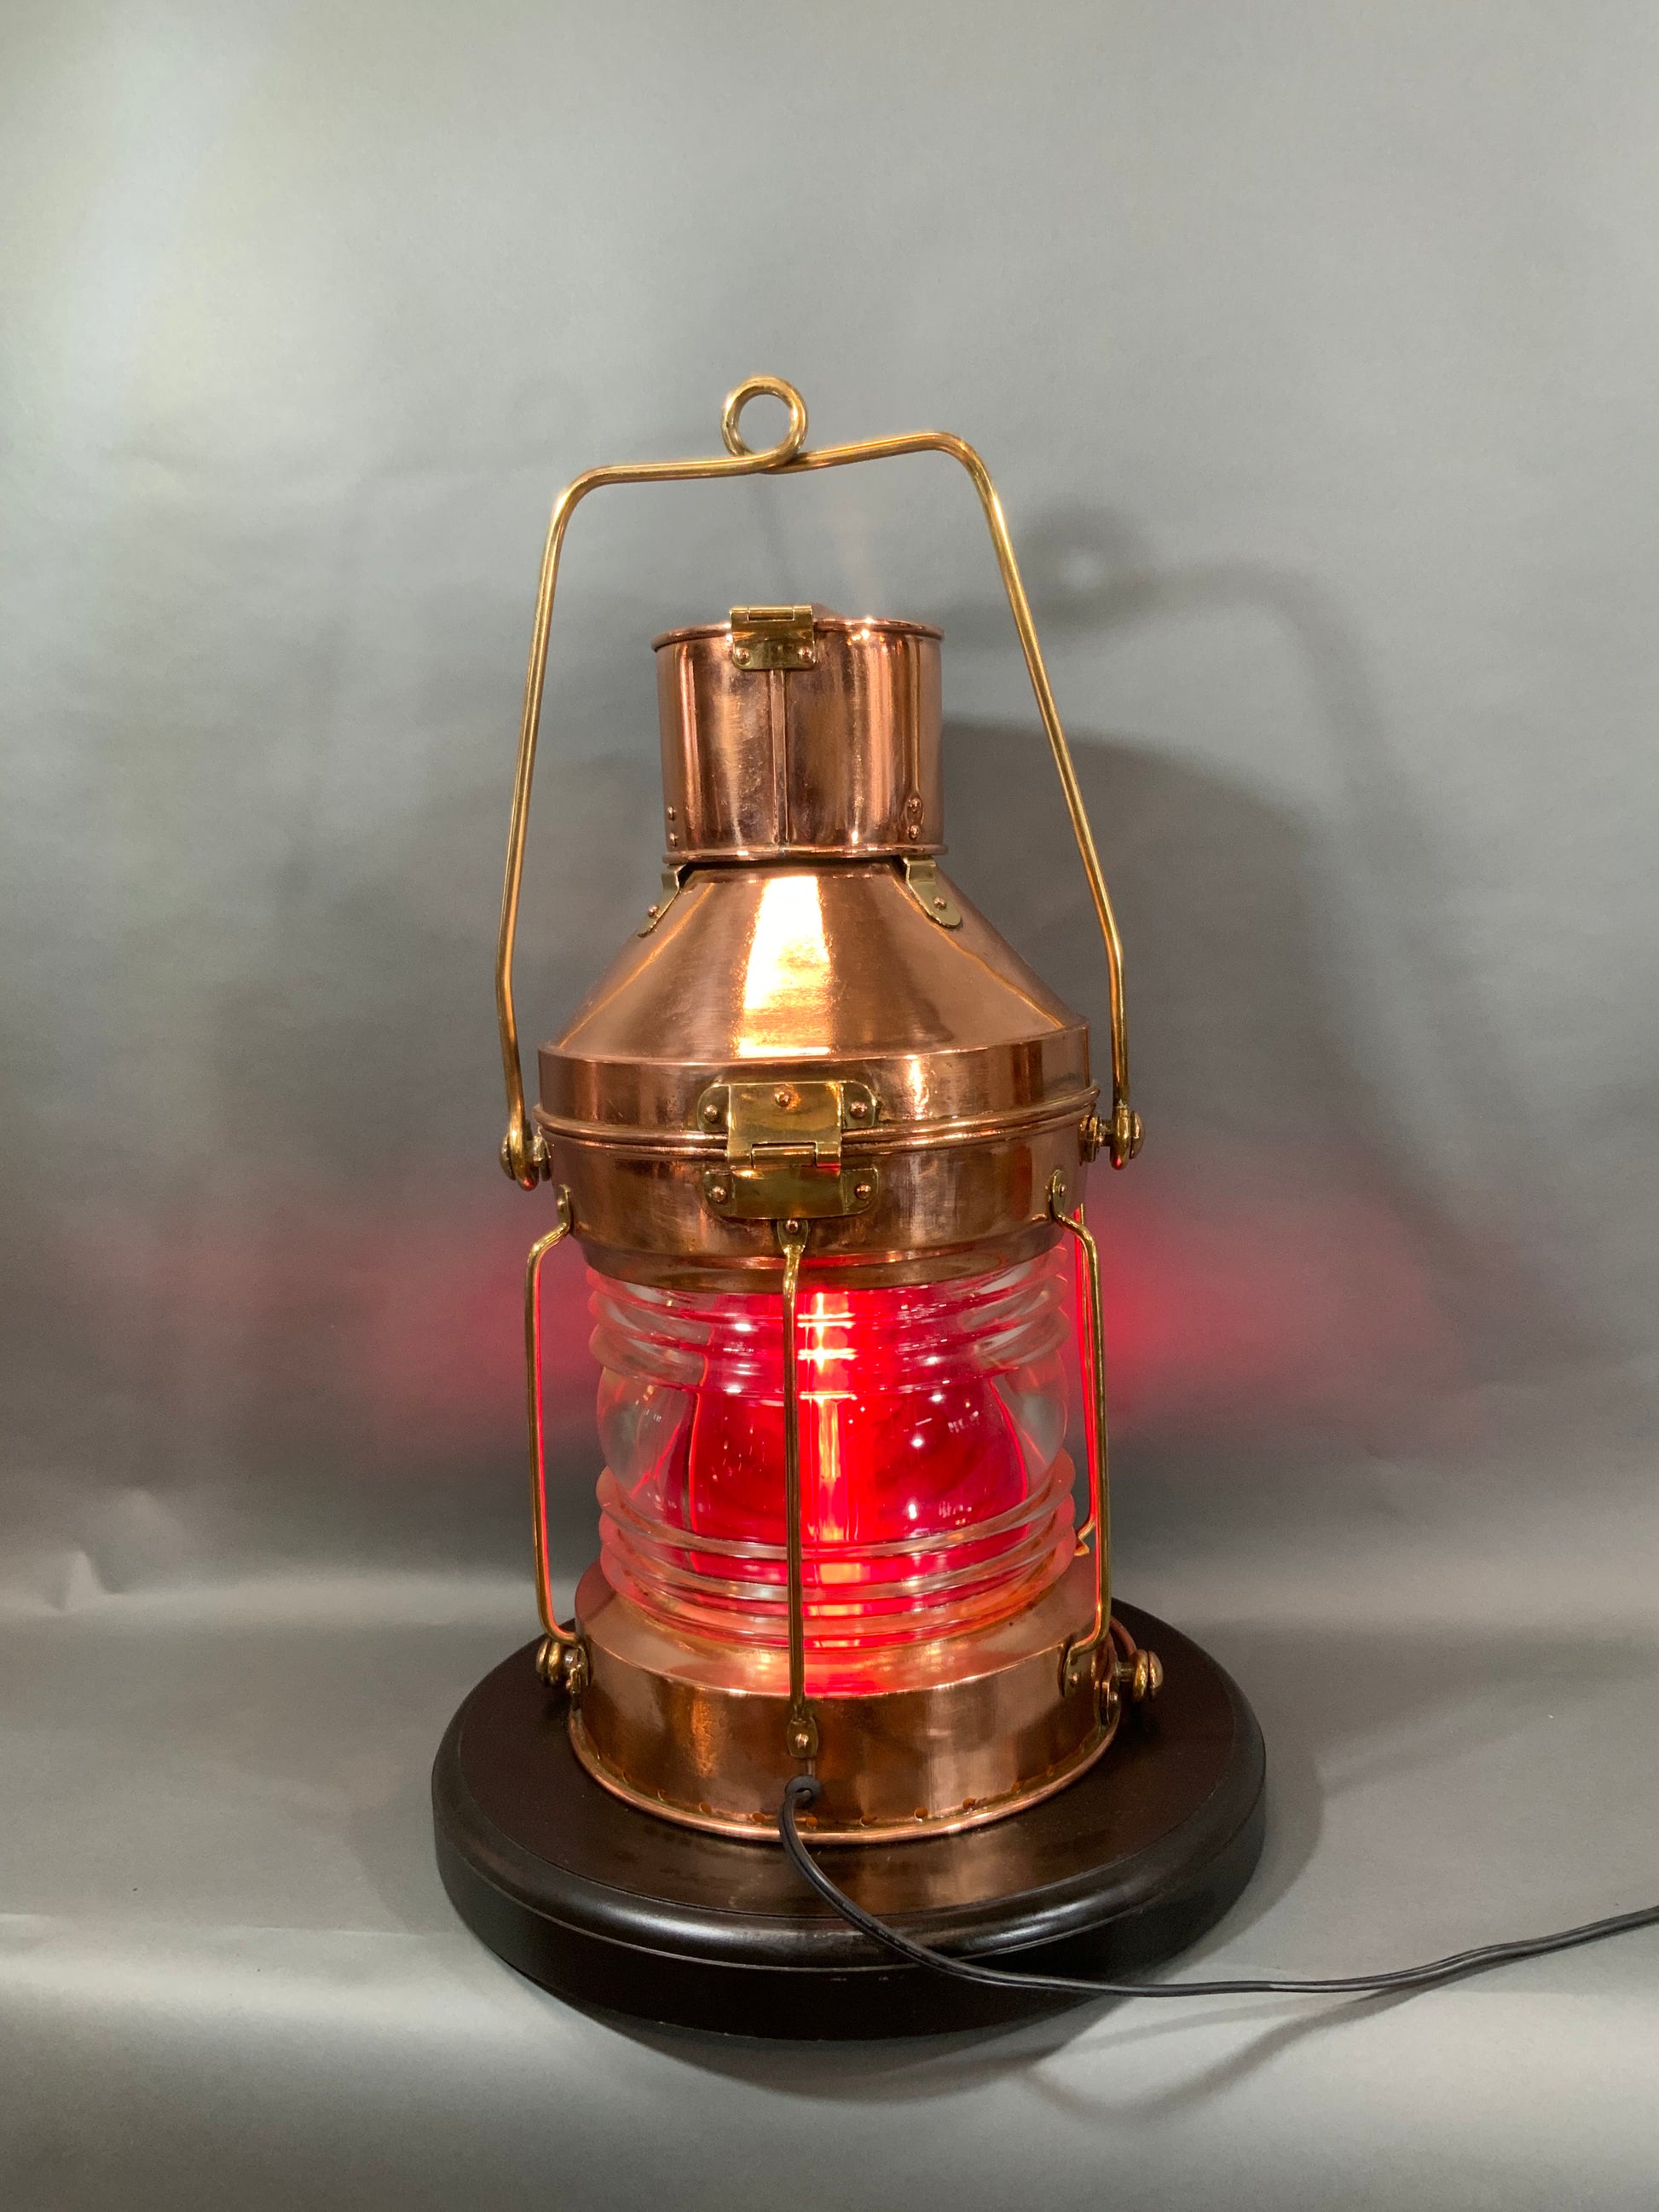 Solid Copper Ship's Anchor Lantern by Meteorite of England